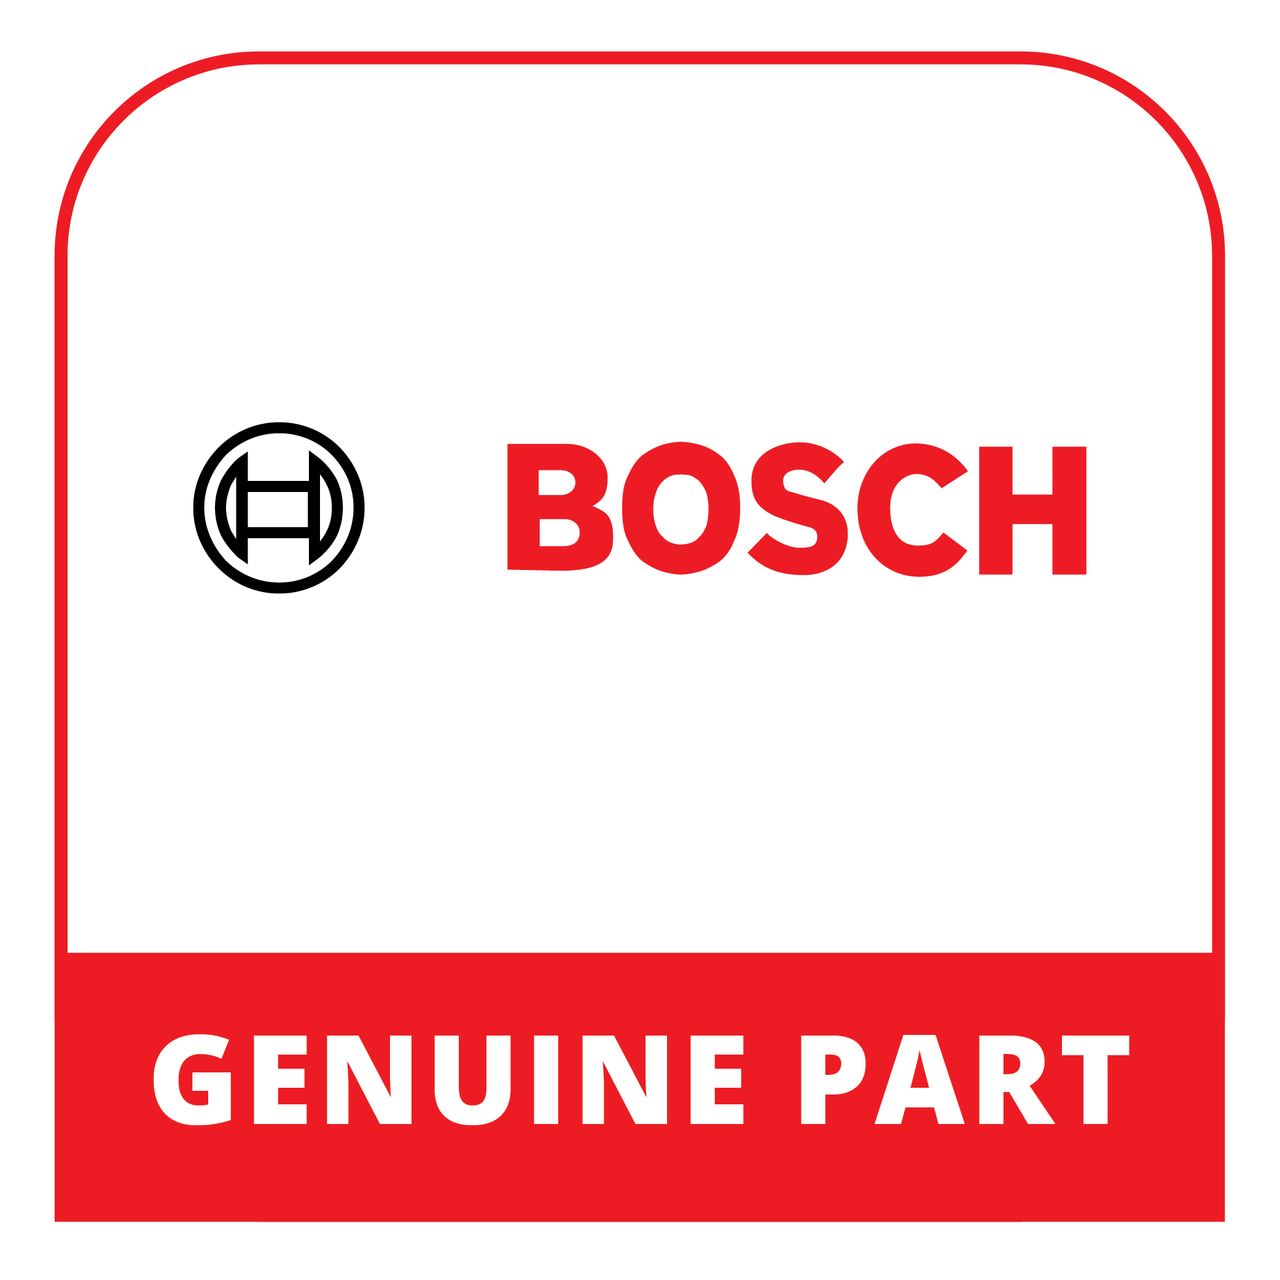 Bosch (Thermador) 00778809 - Back Wall Panel - Genuine Bosch (Thermador) Part